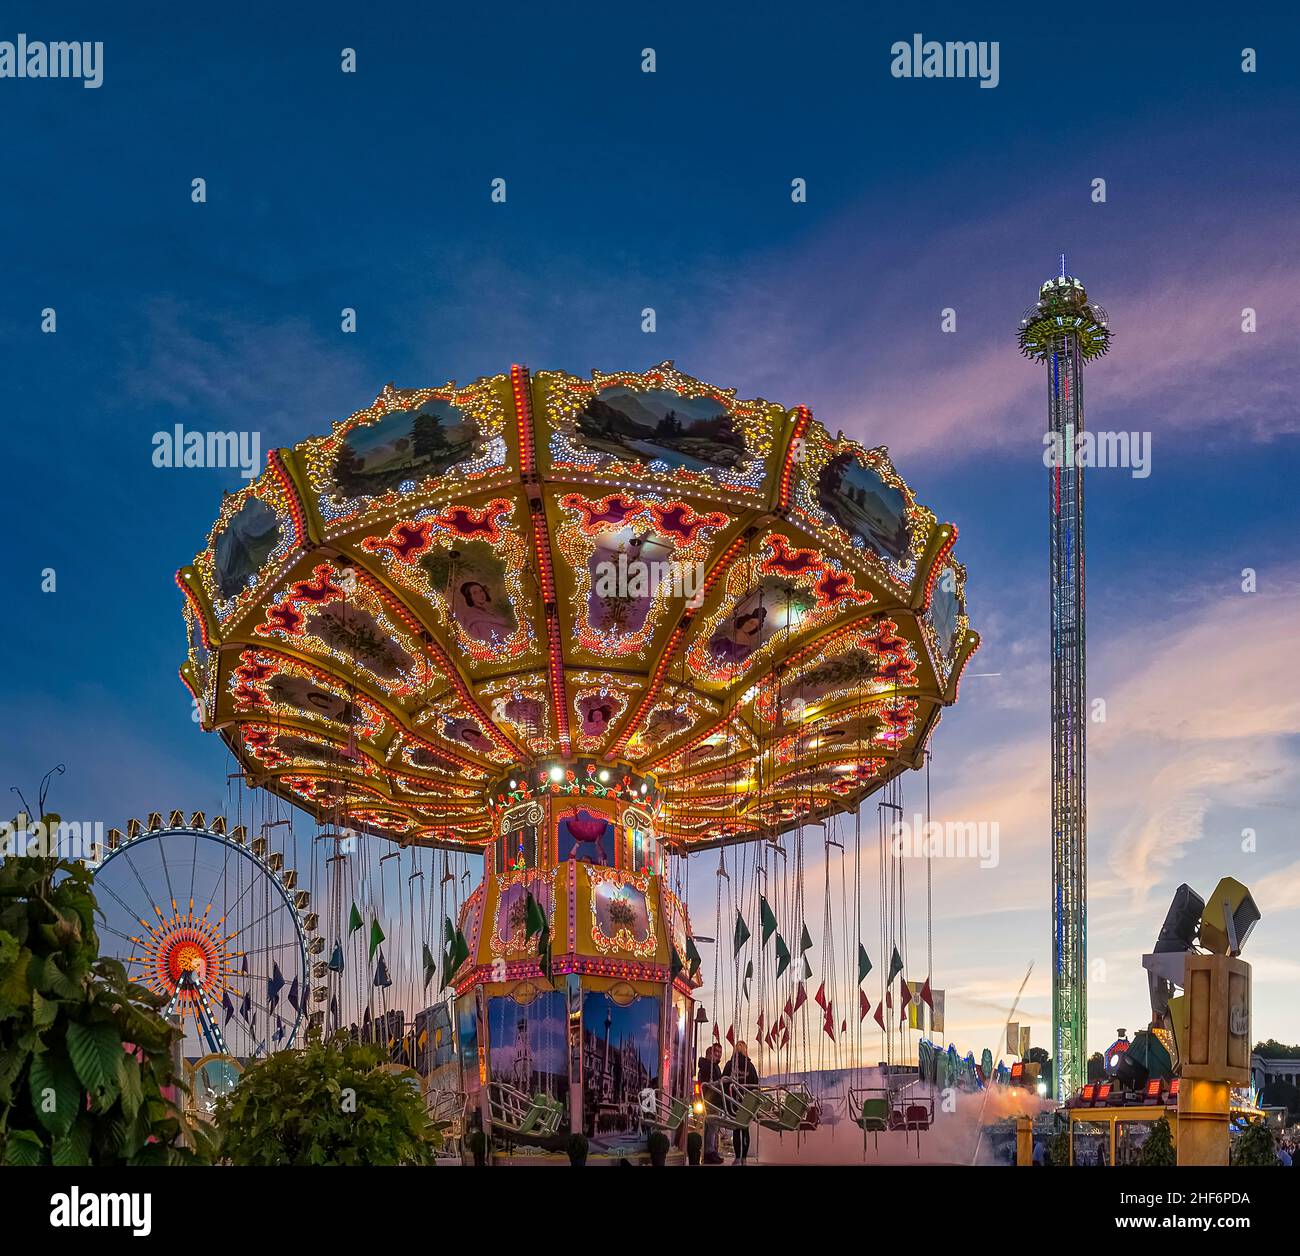 Carousel ride at blue hour. Carousel background. Stock Photo